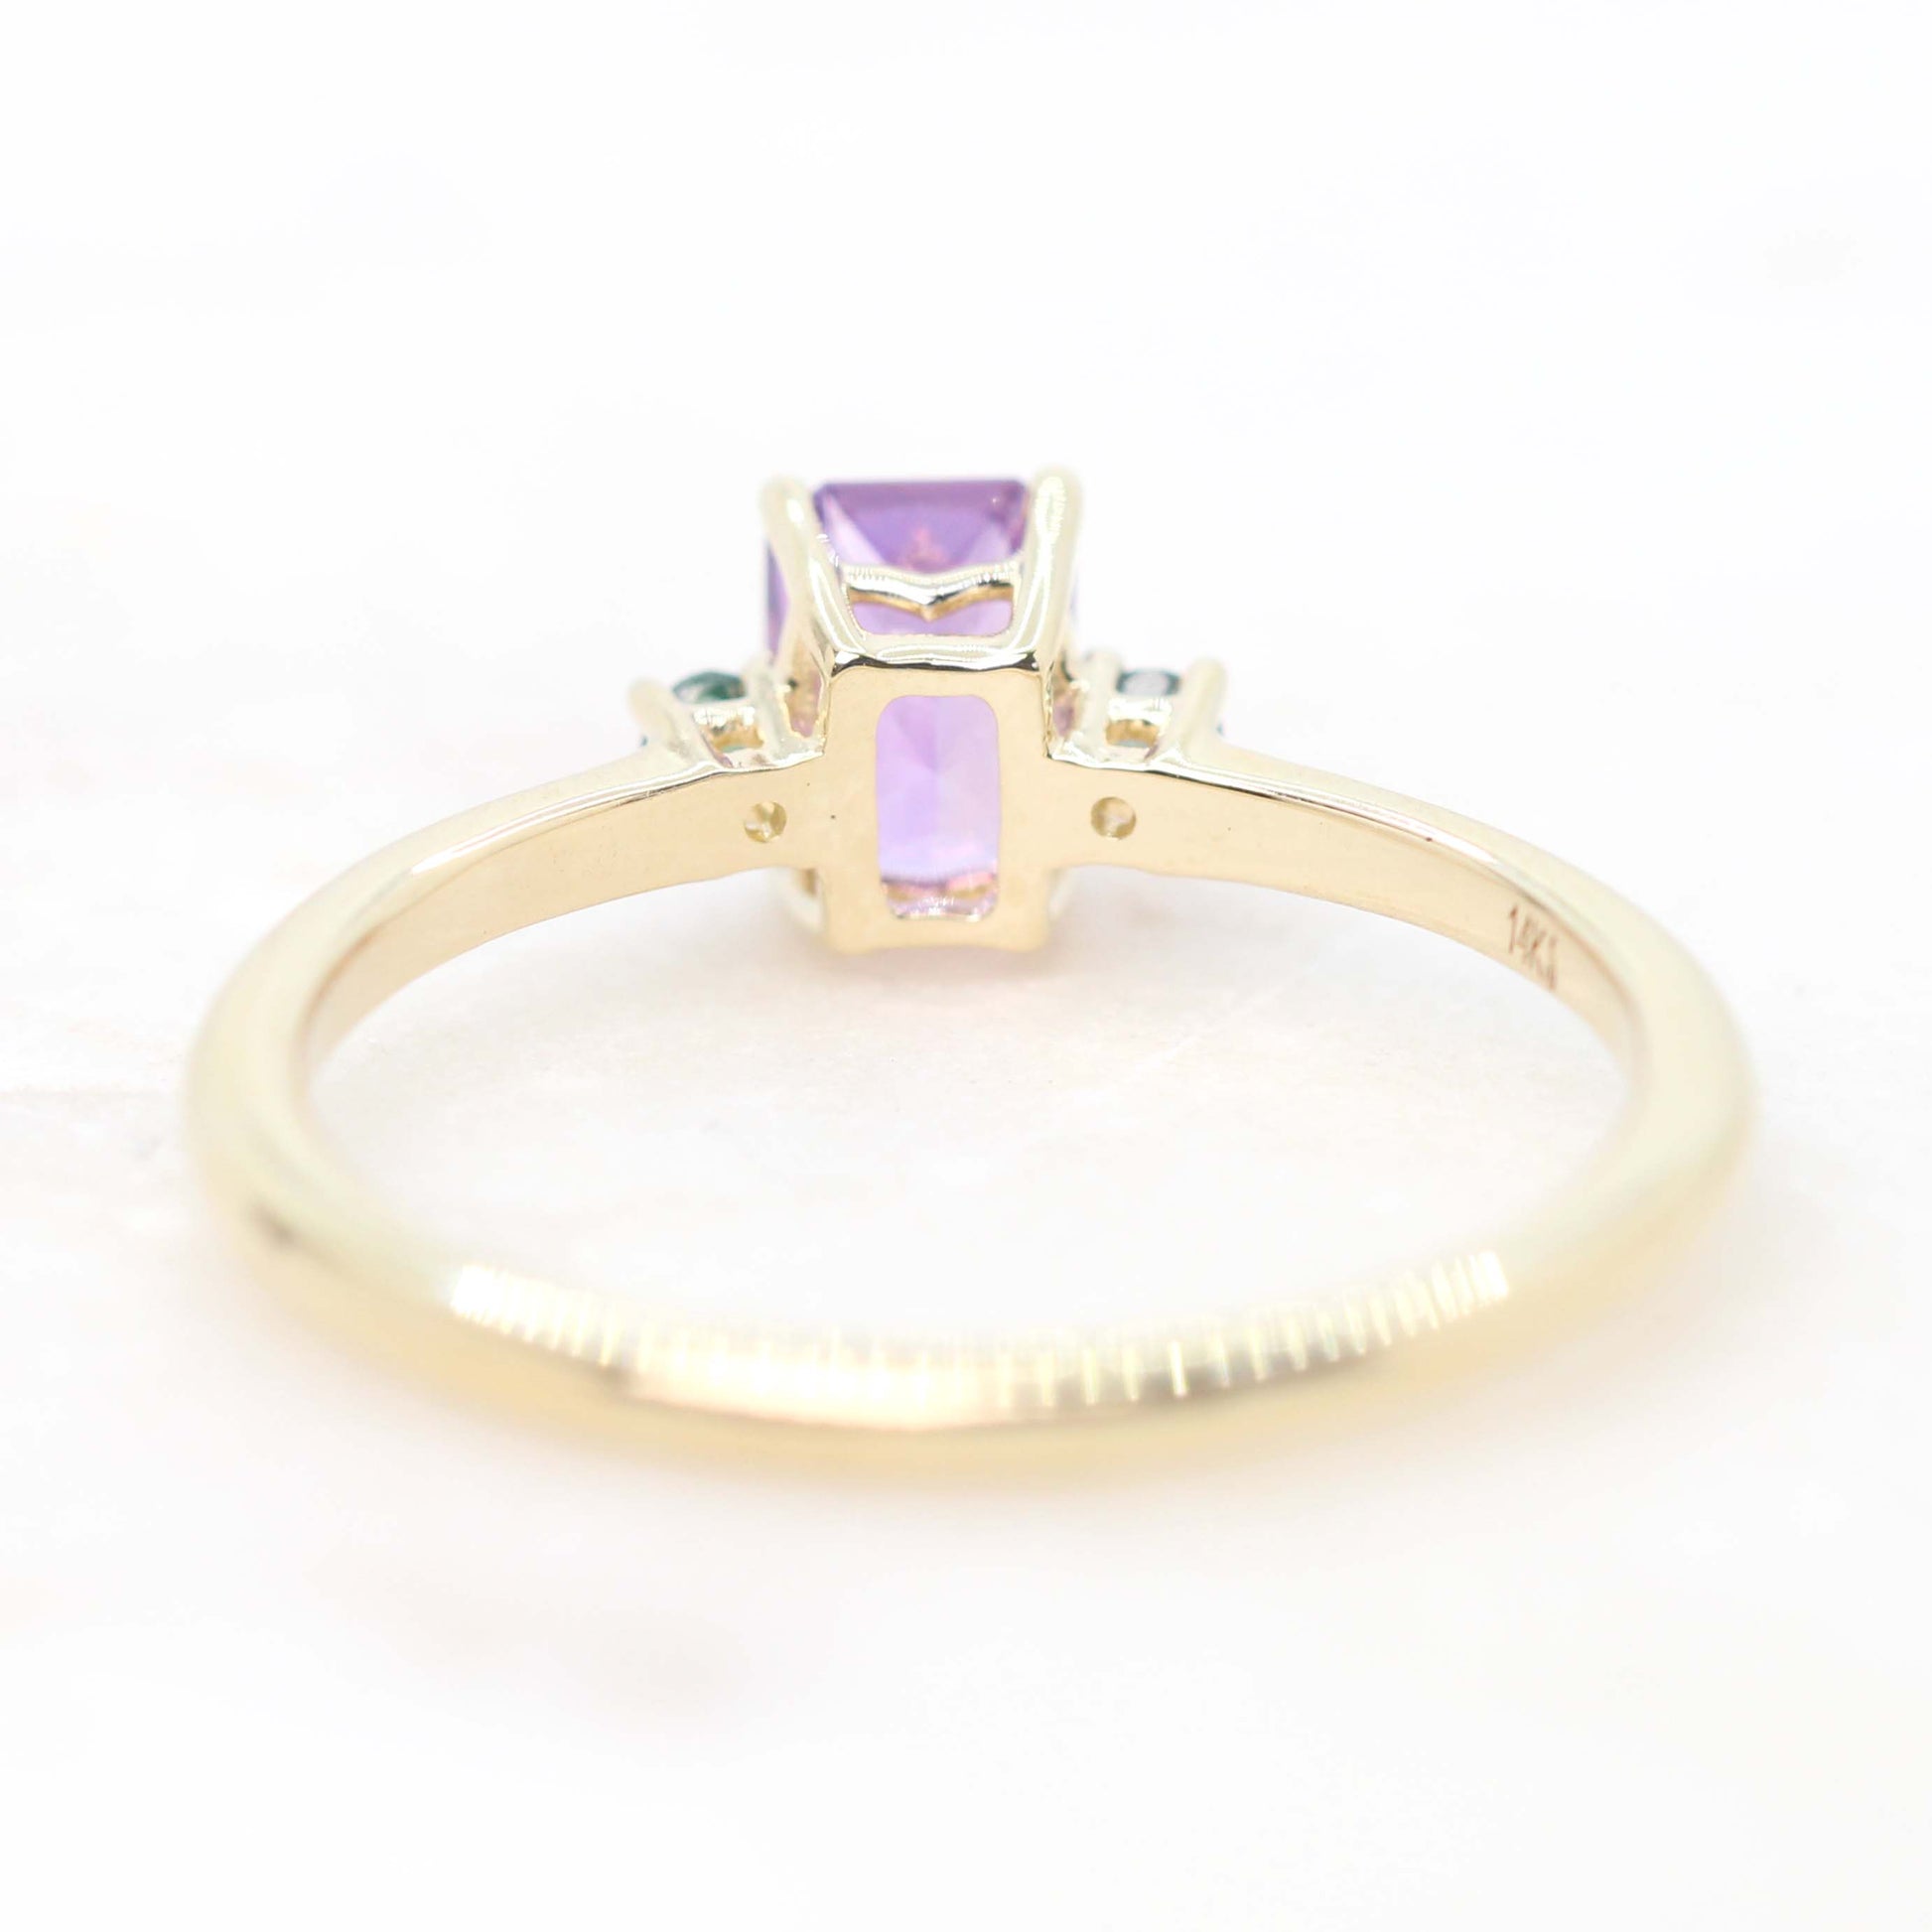 Terra Ring with a 0.81 Carat Radiant Cut Purple Sapphire and Teal Sapphire Accents in 14k Yellow Gold - Ready to Size and Ship - Midwinter Co. Alternative Bridal Rings and Modern Fine Jewelry